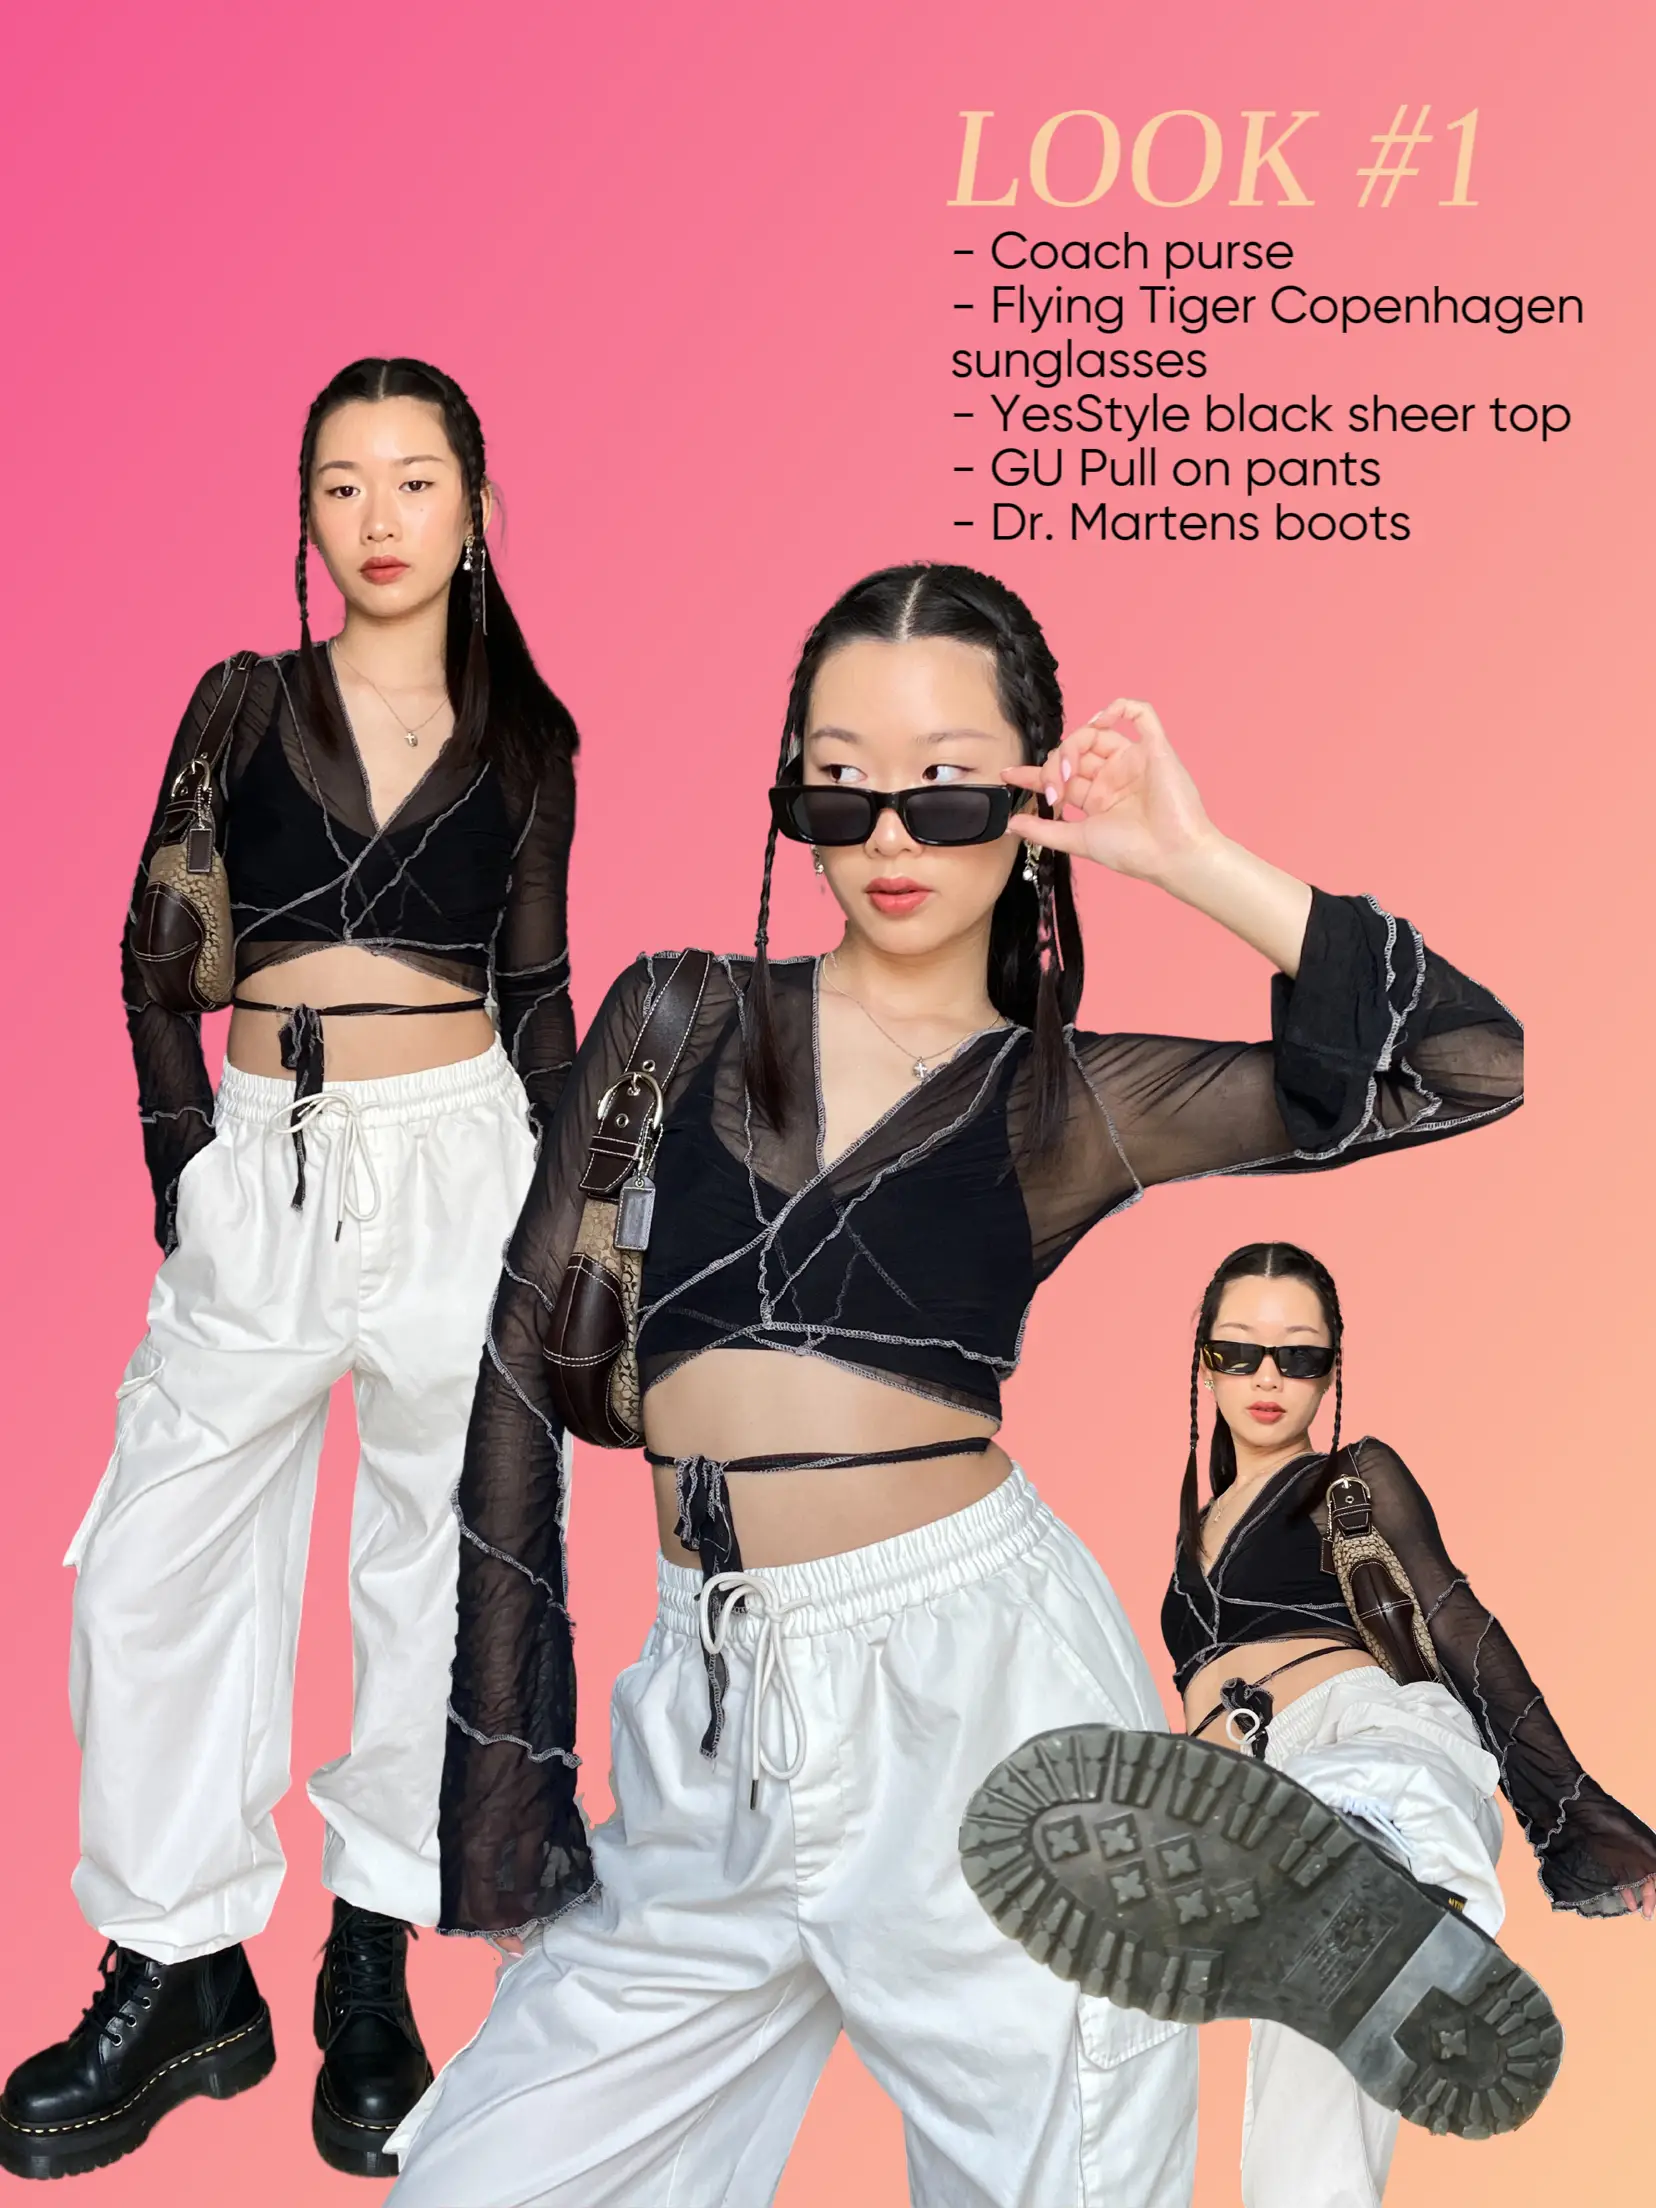 nayeon outfit inspo for the twice concert!